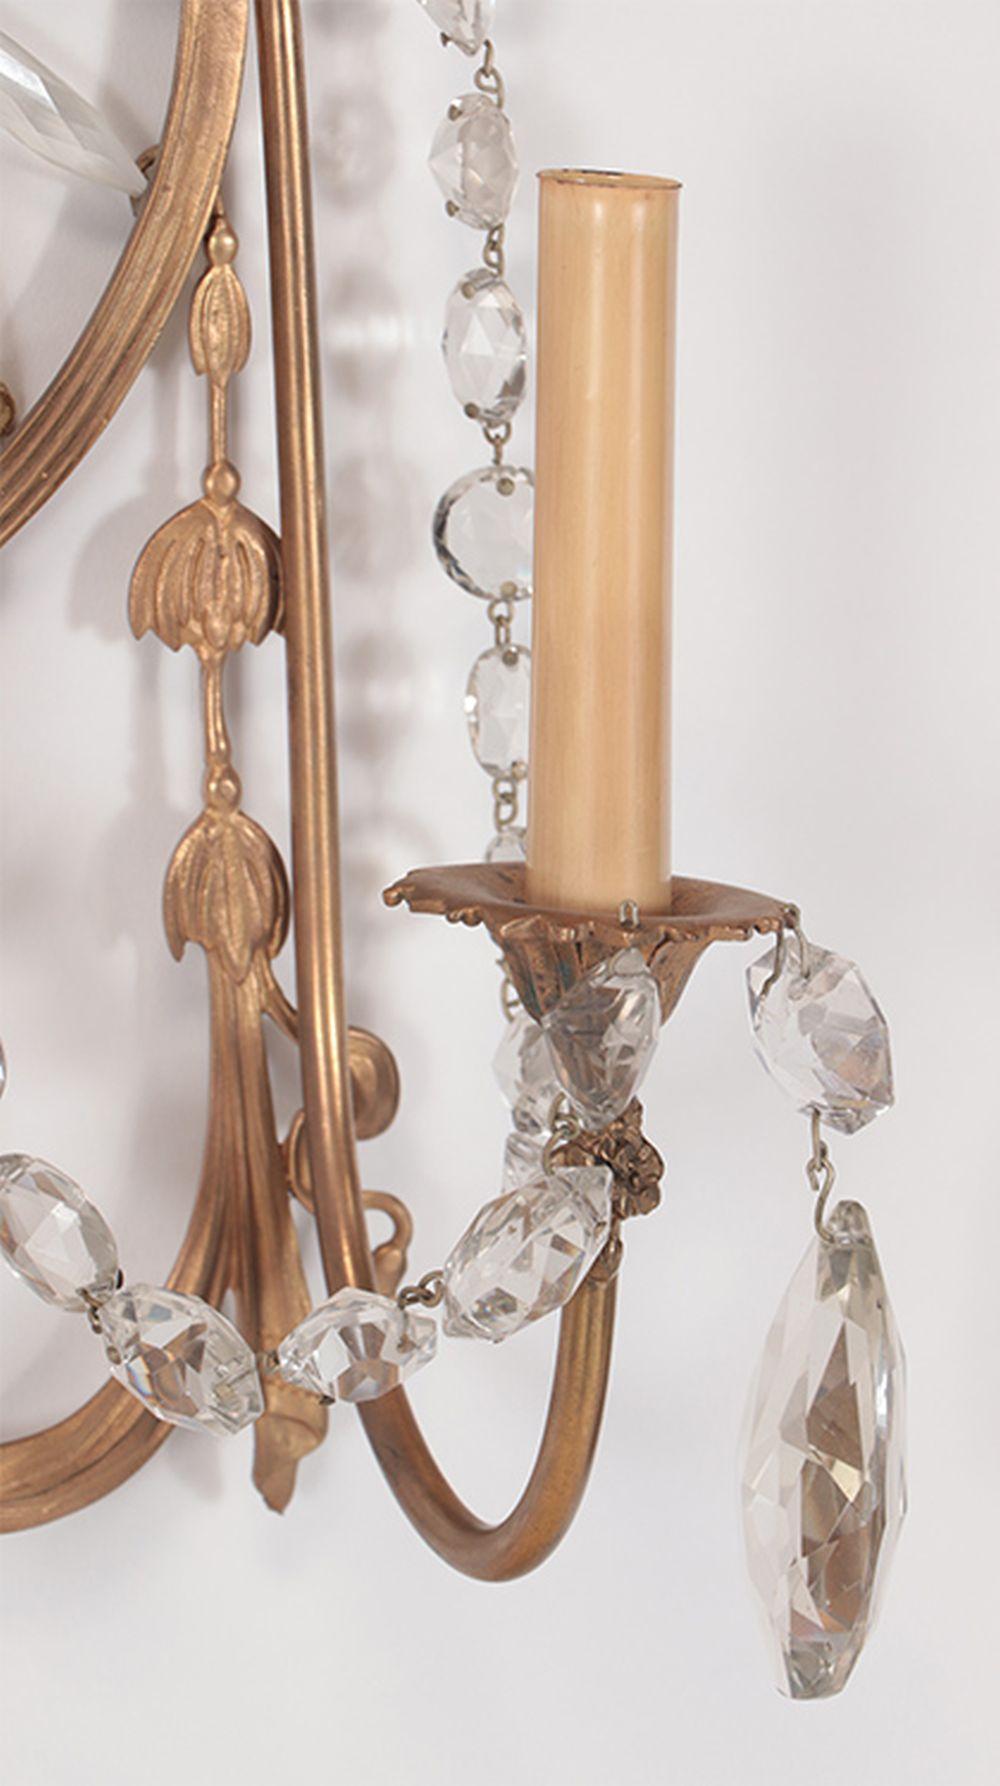 Pair of Early 20th Century Regency Style Bronze & Crystal Wall Sconces For Sale 1